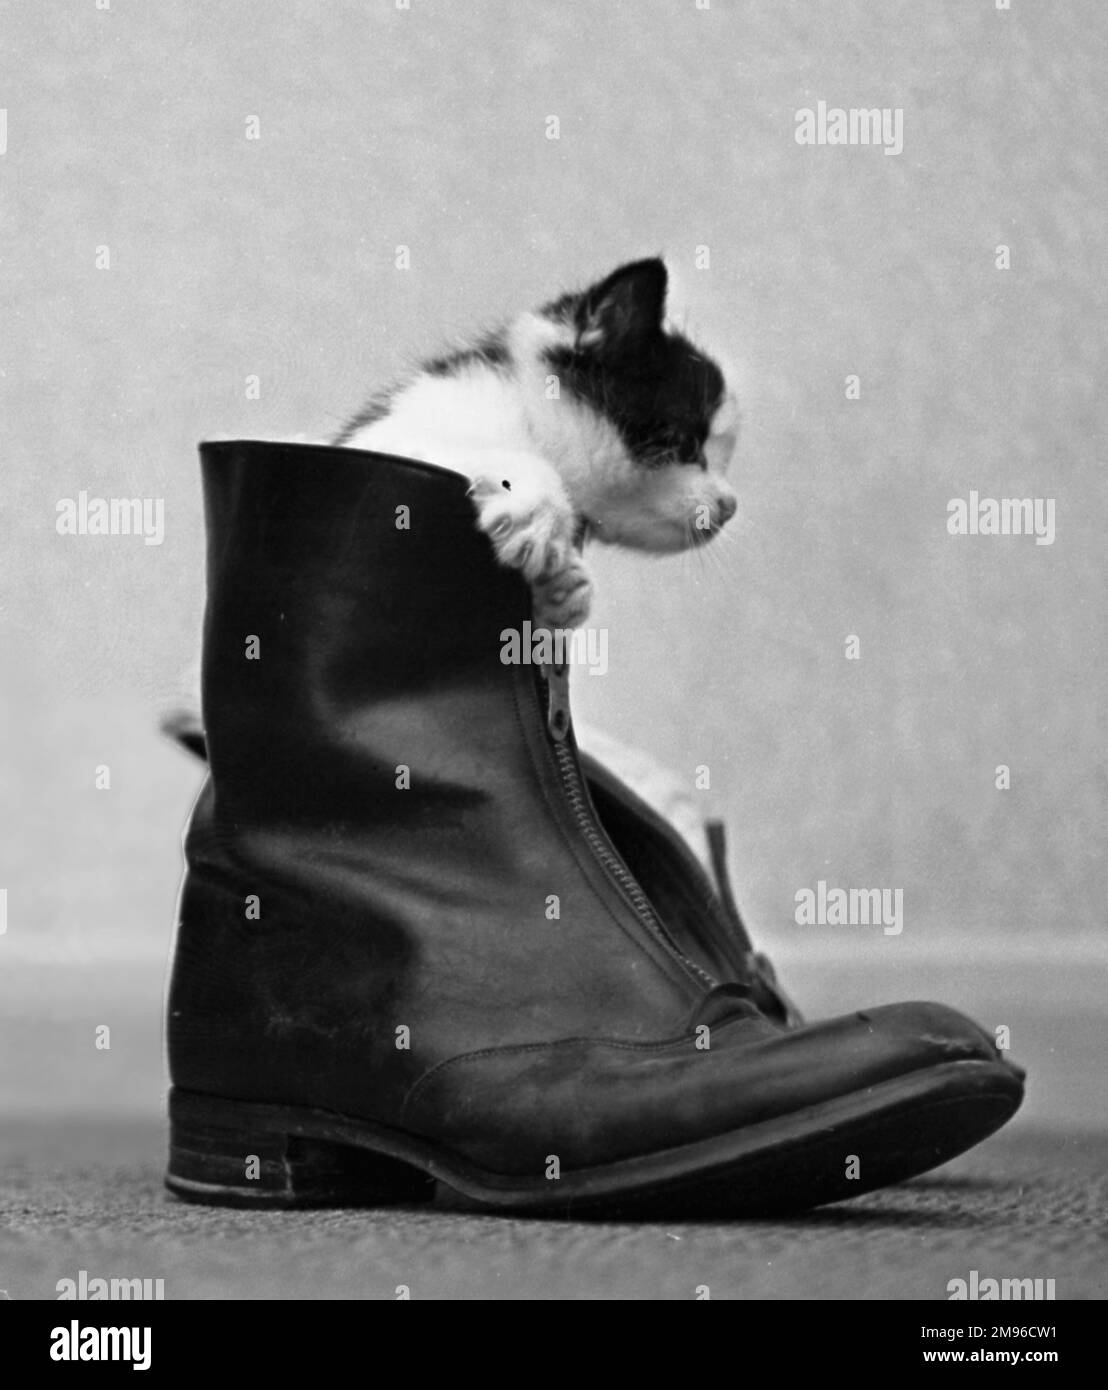 A black and white kitten emerging from a leather boot. Stock Photo